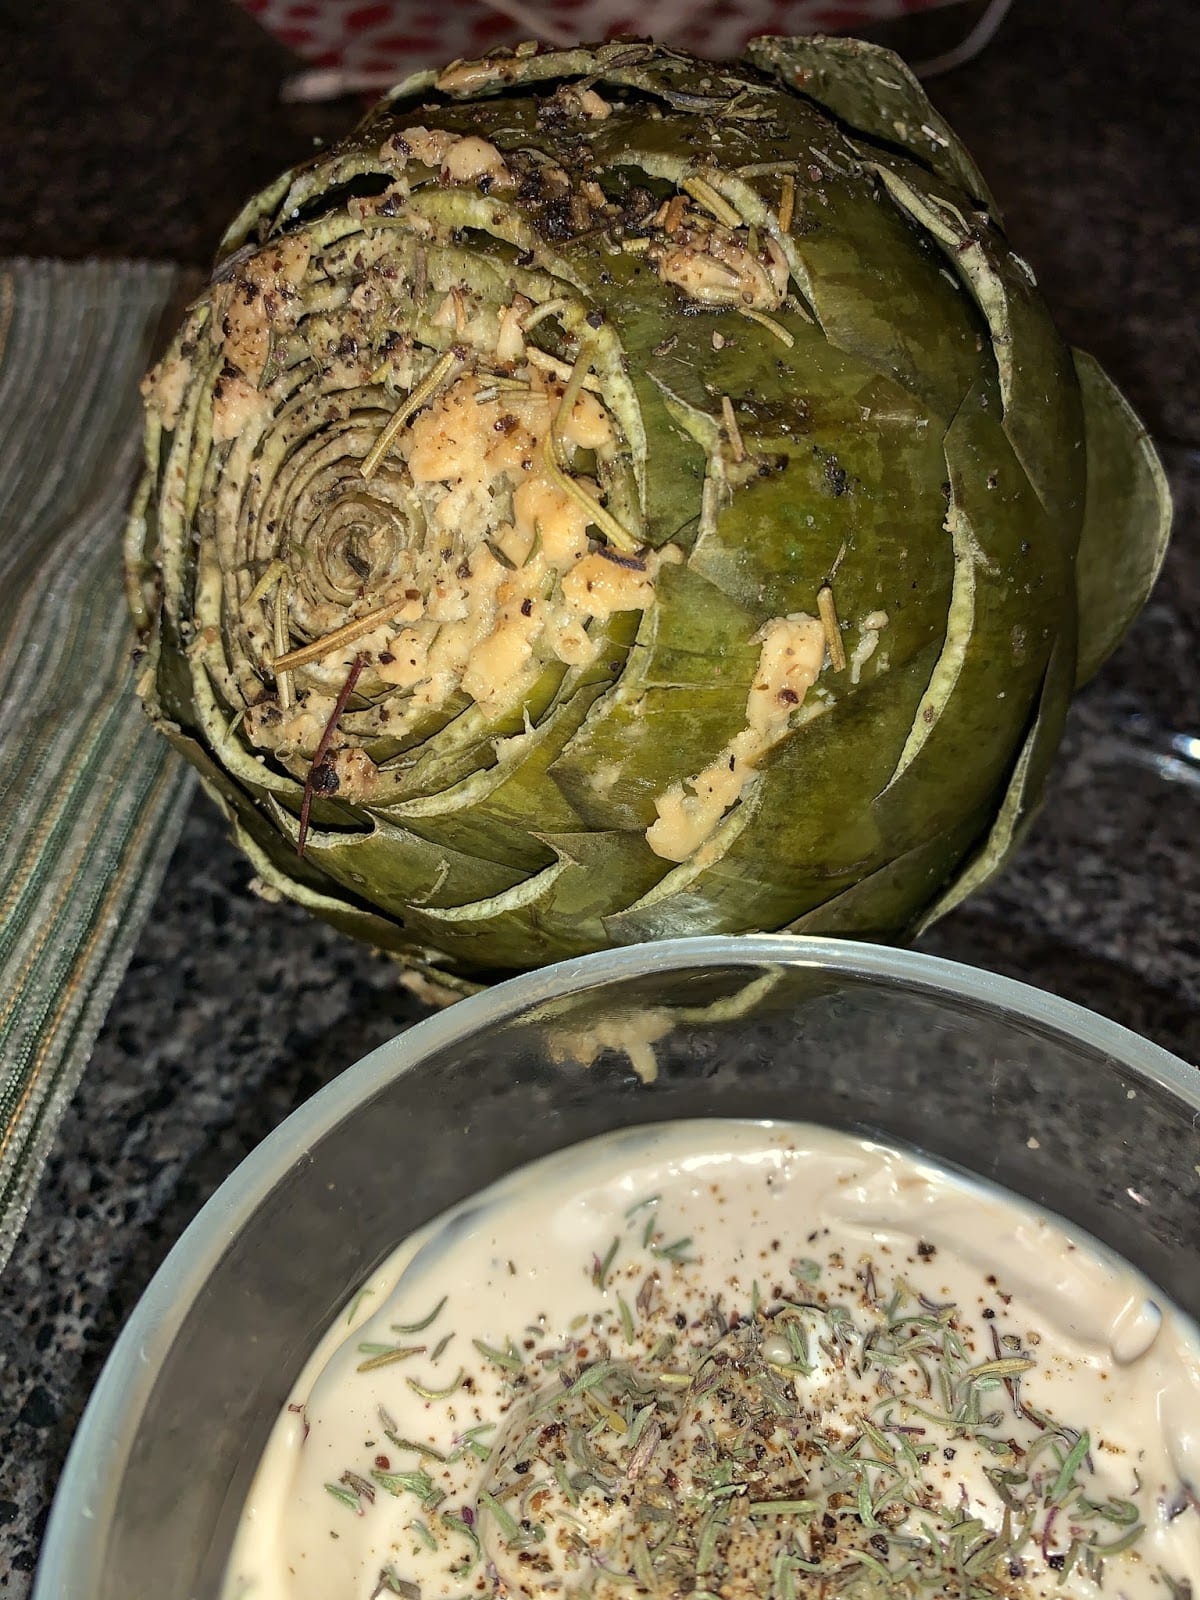 Instapot Artichoke with dipping sauce